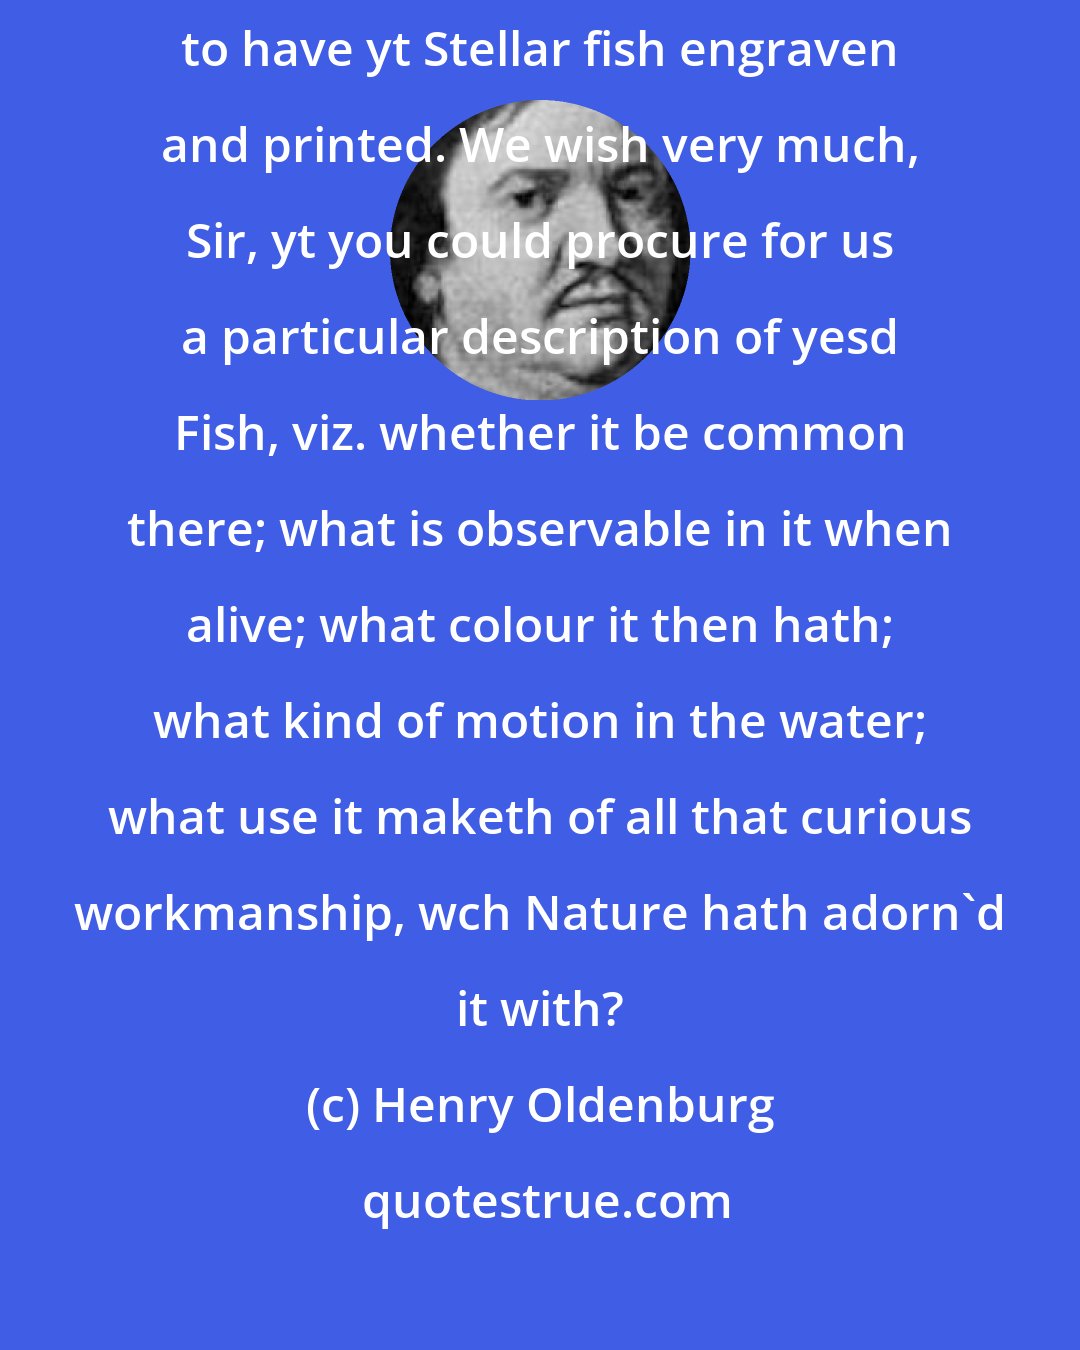 Henry Oldenburg: The King saw them with no common satisfaction, expressing his desire in no particular to have yt Stellar fish engraven and printed. We wish very much, Sir, yt you could procure for us a particular description of yesd Fish, viz. whether it be common there; what is observable in it when alive; what colour it then hath; what kind of motion in the water; what use it maketh of all that curious workmanship, wch Nature hath adorn'd it with?